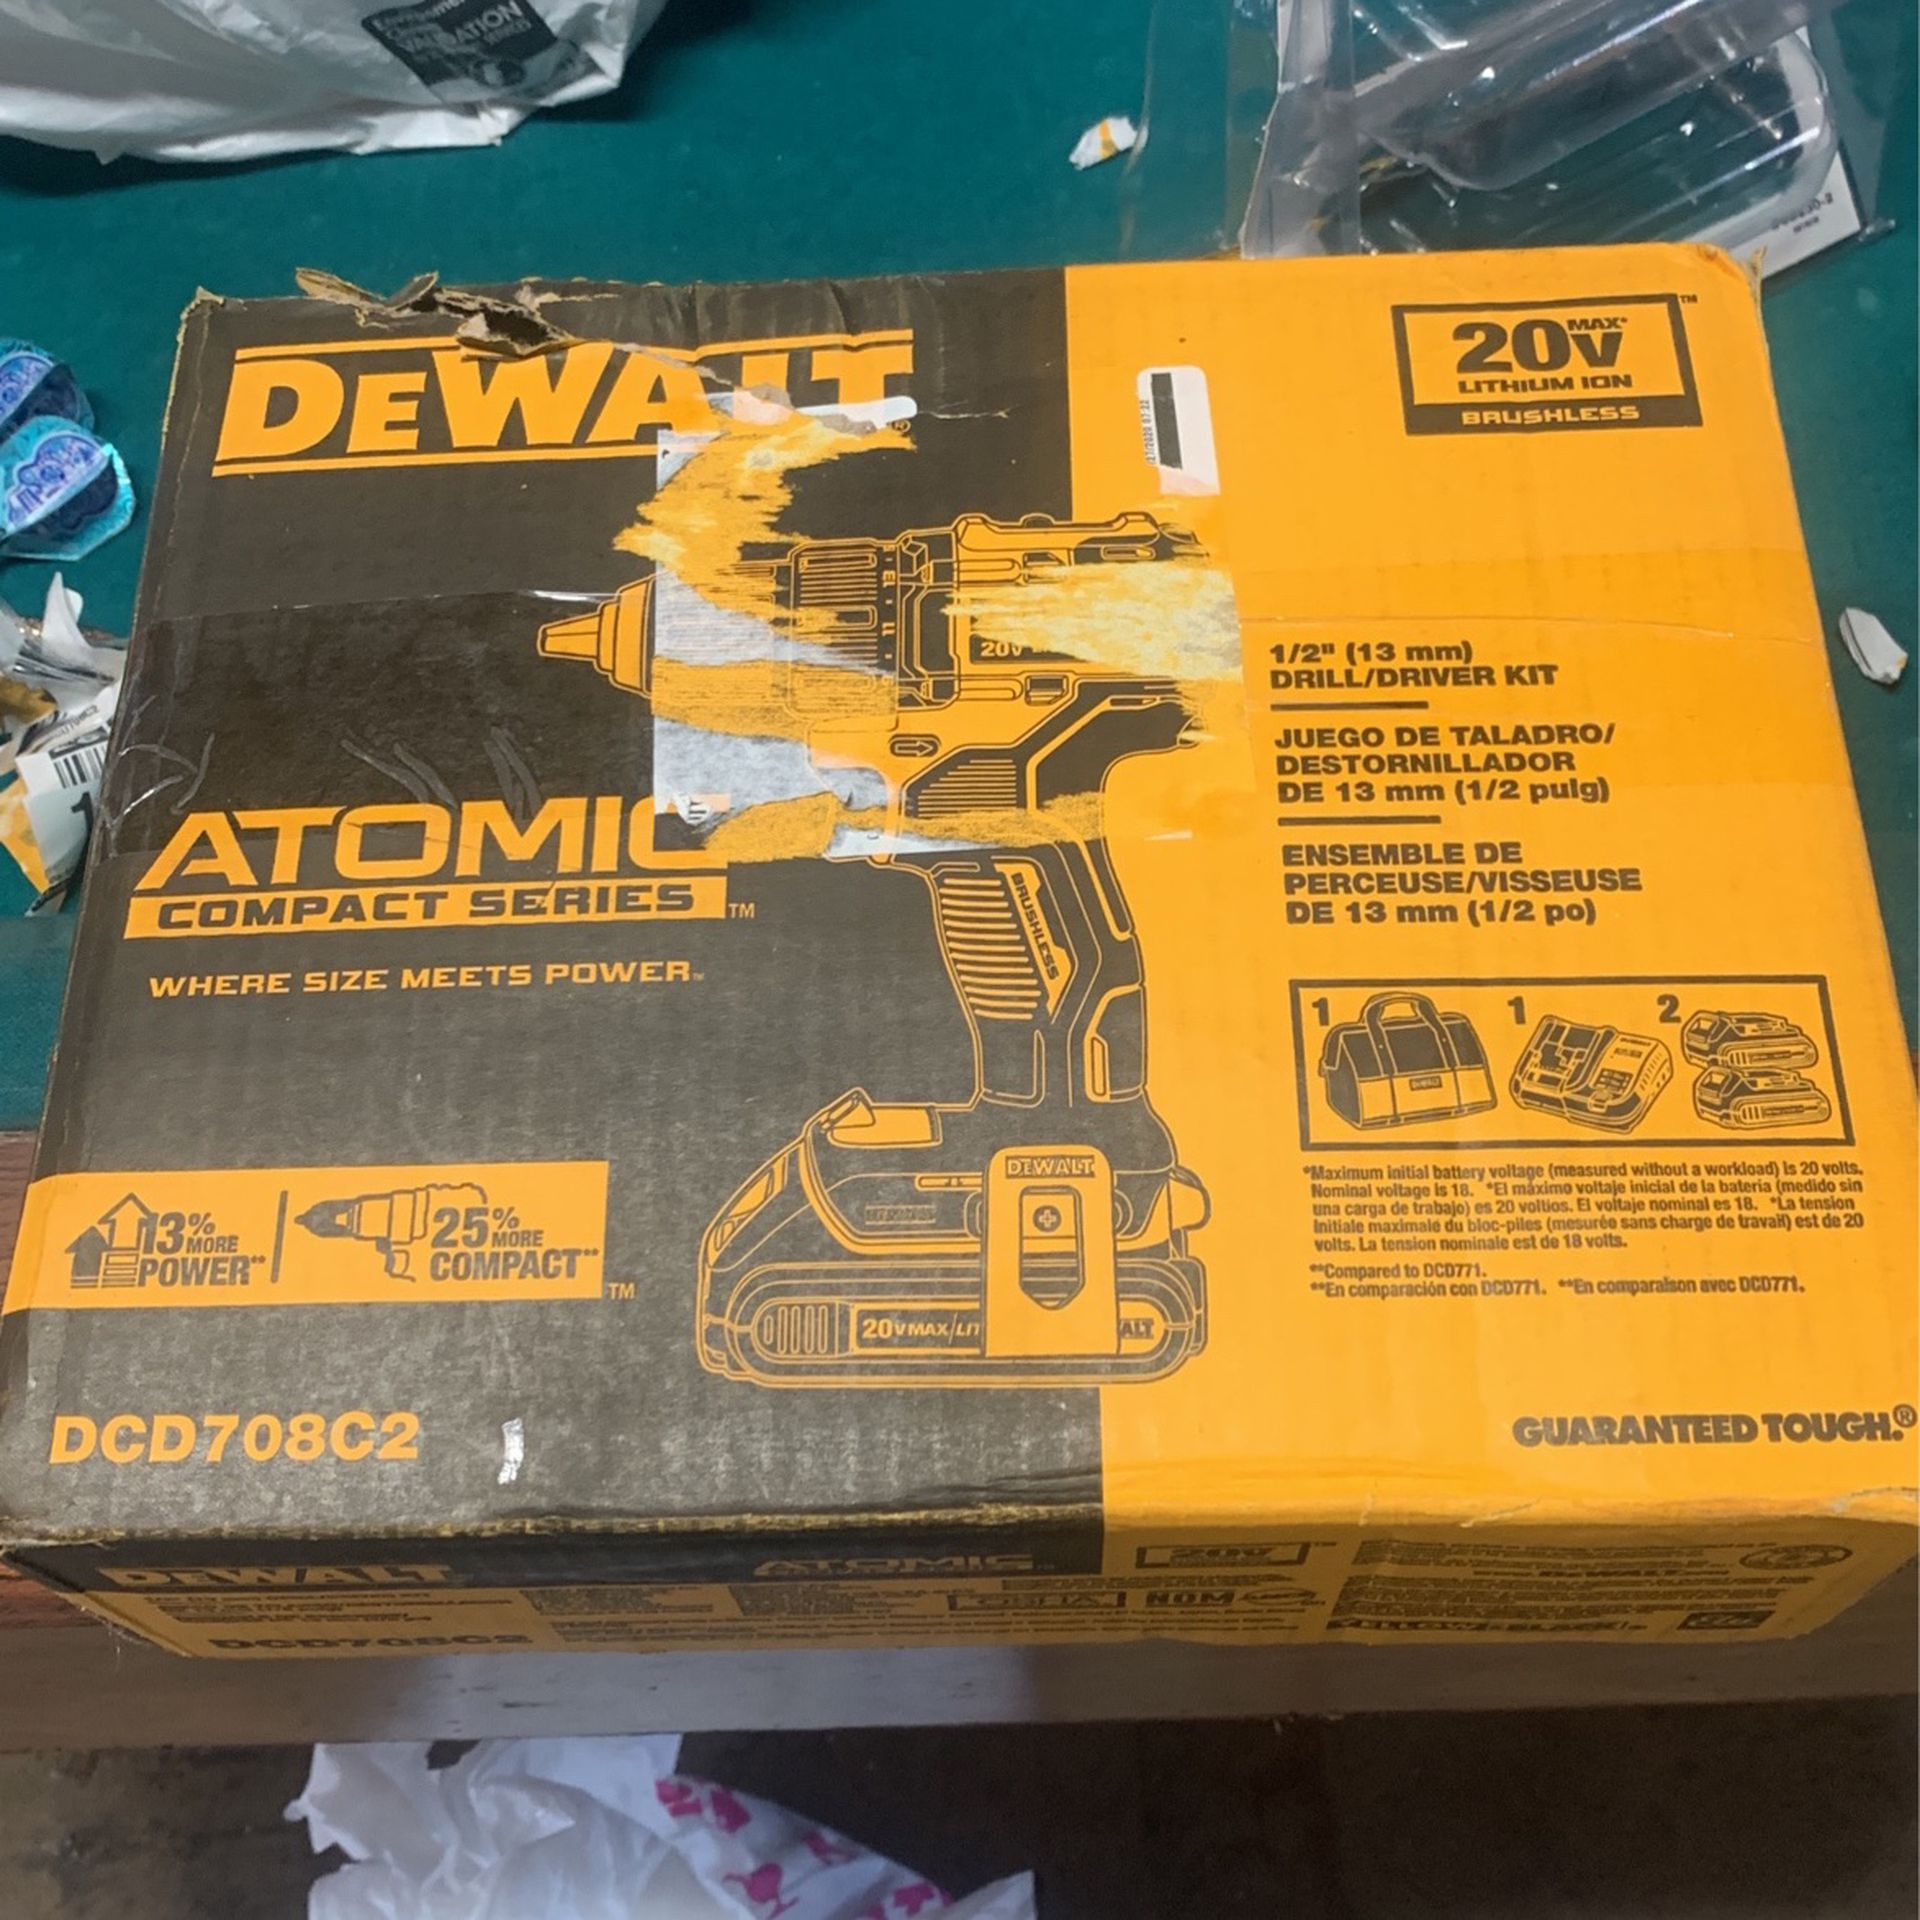 Brand New DeWalt Cordless Drill, Batteries, Charger and Bag